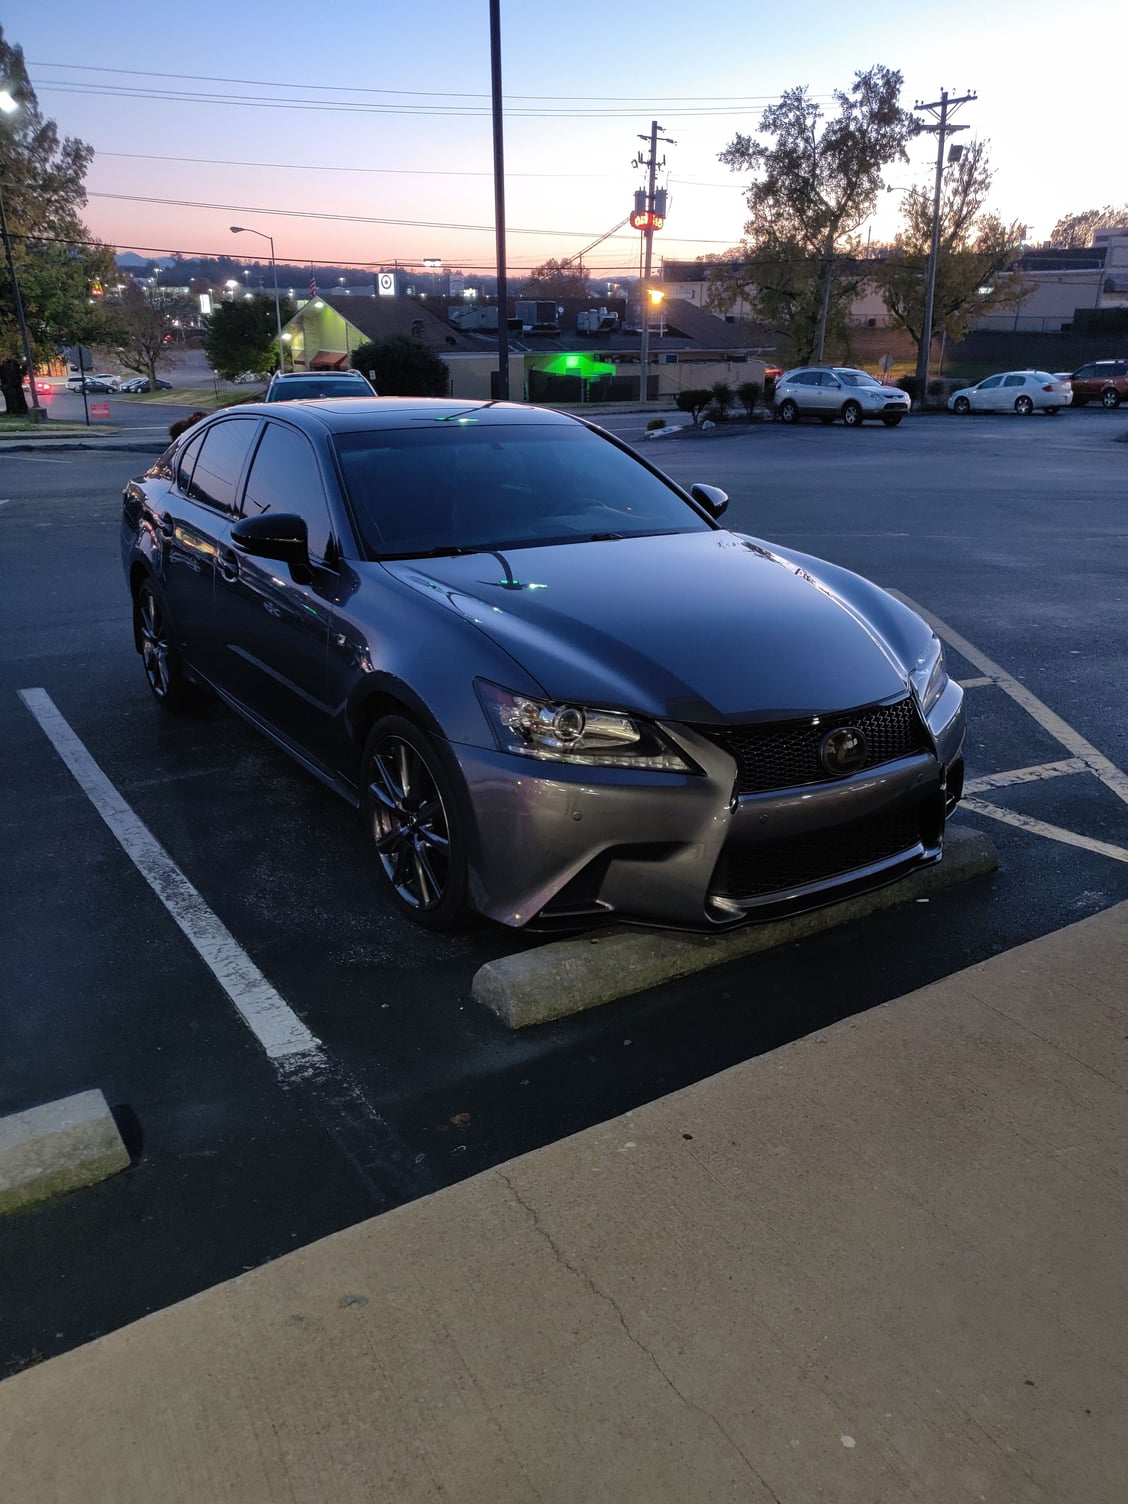 2013 Lexus GS350 - 2013 GS 350 F-Sport in Nebula Gray Pearl EXCELLENT Condition! - Used - VIN JTHBE1BL5D5028682 - 67,500 Miles - 2WD - Automatic - Sedan - Gray - Johnson City, TN 37604, United States